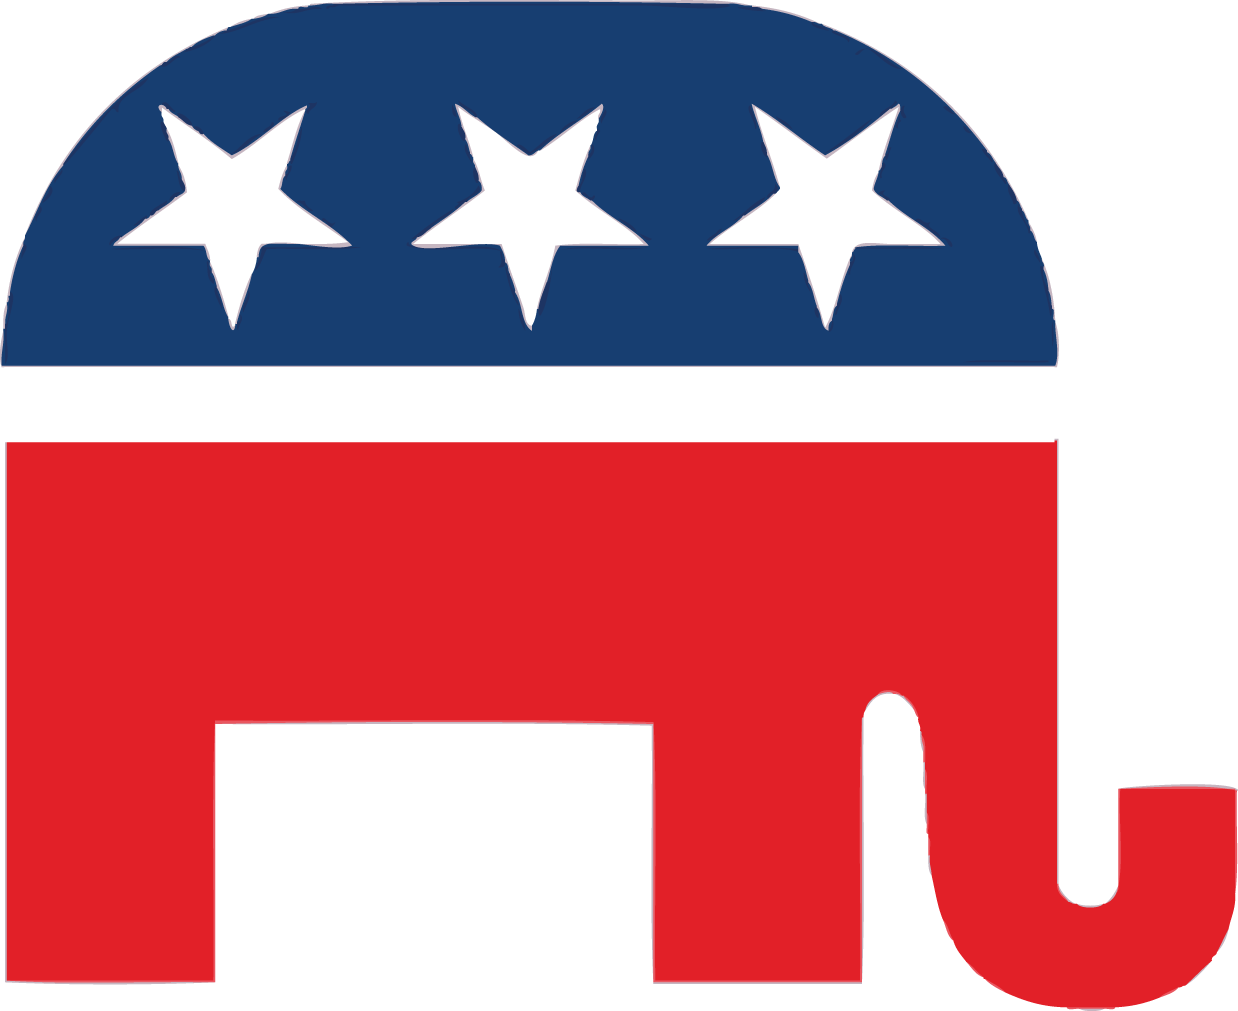  collection of party. Democracy clipart republican elephant